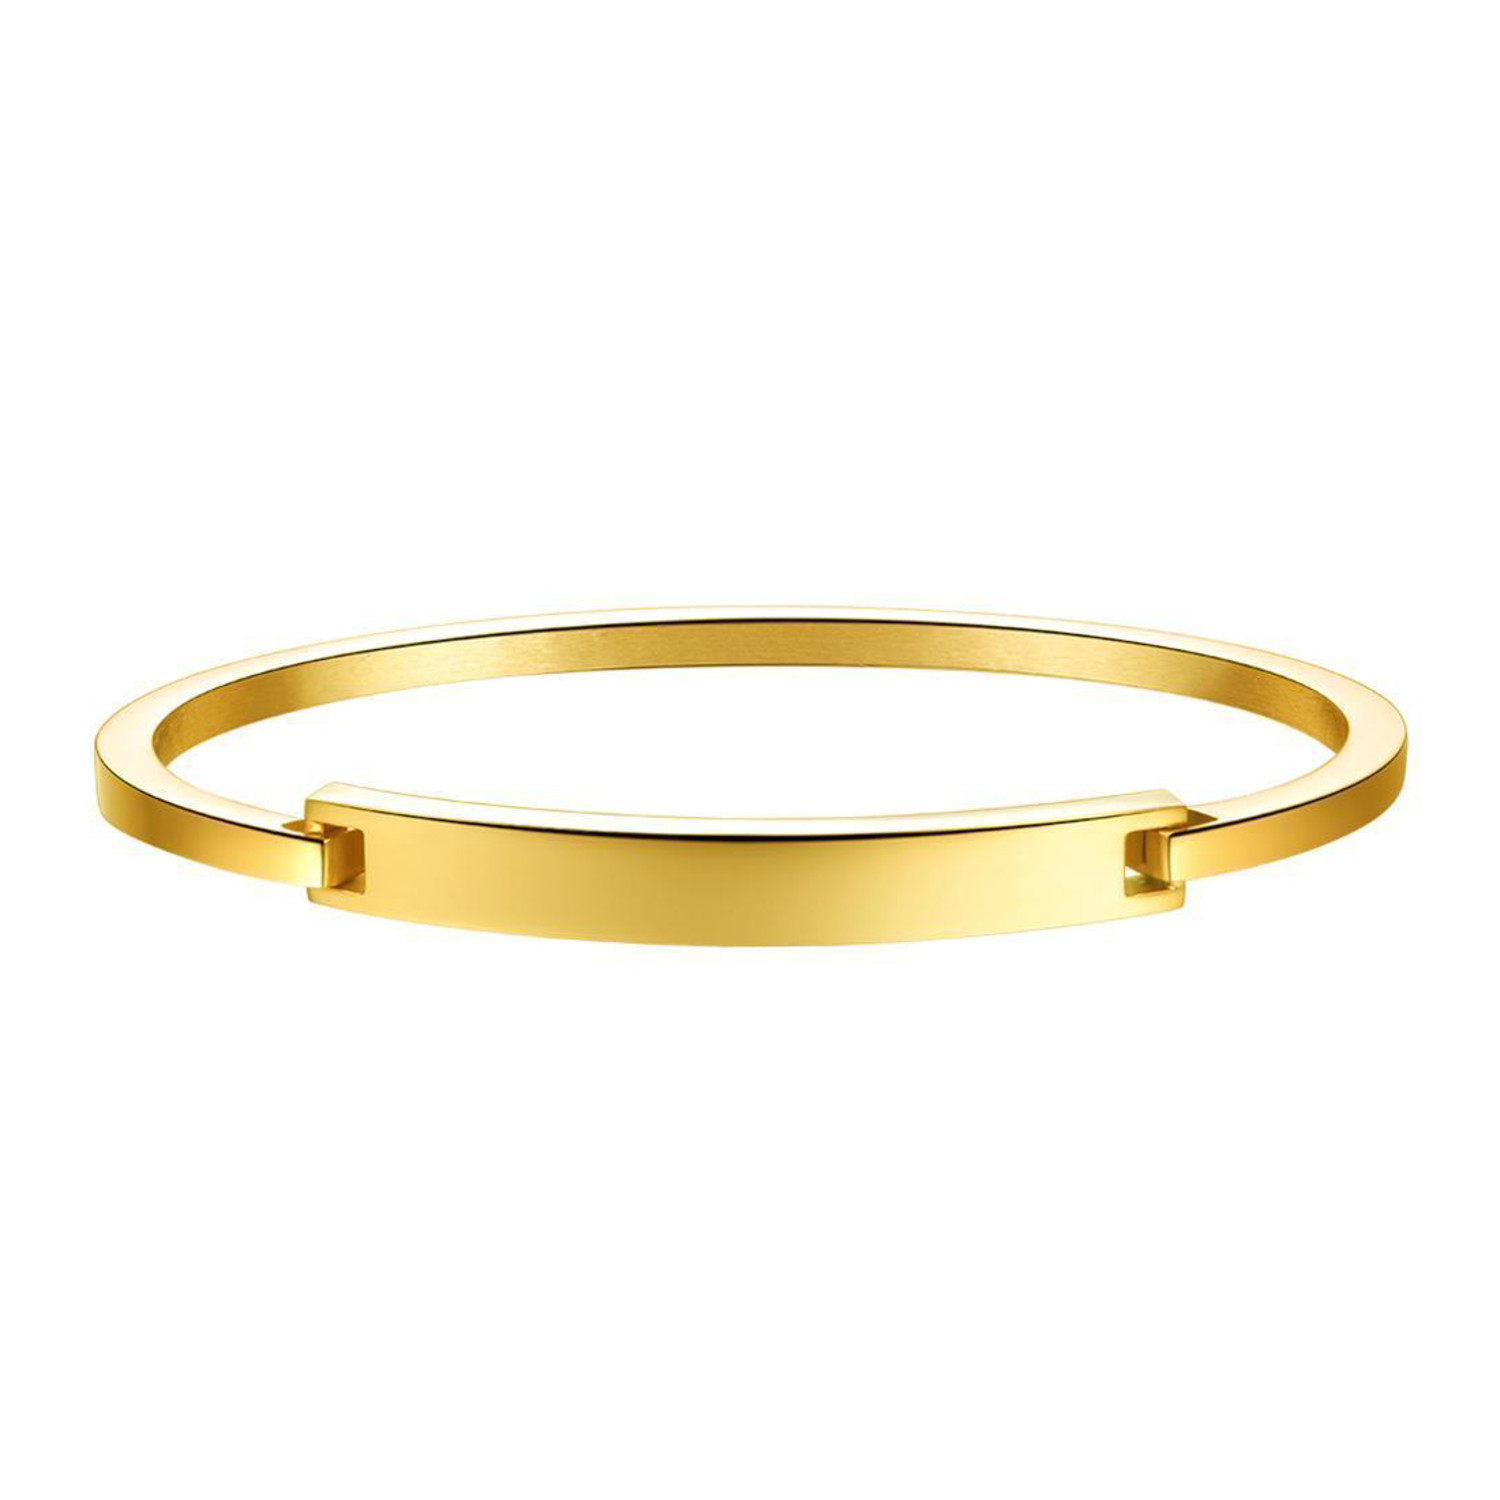 Modern Open Cuff Bangle // 14K Gold + Stainless Steel - Rubique Jewelry ...